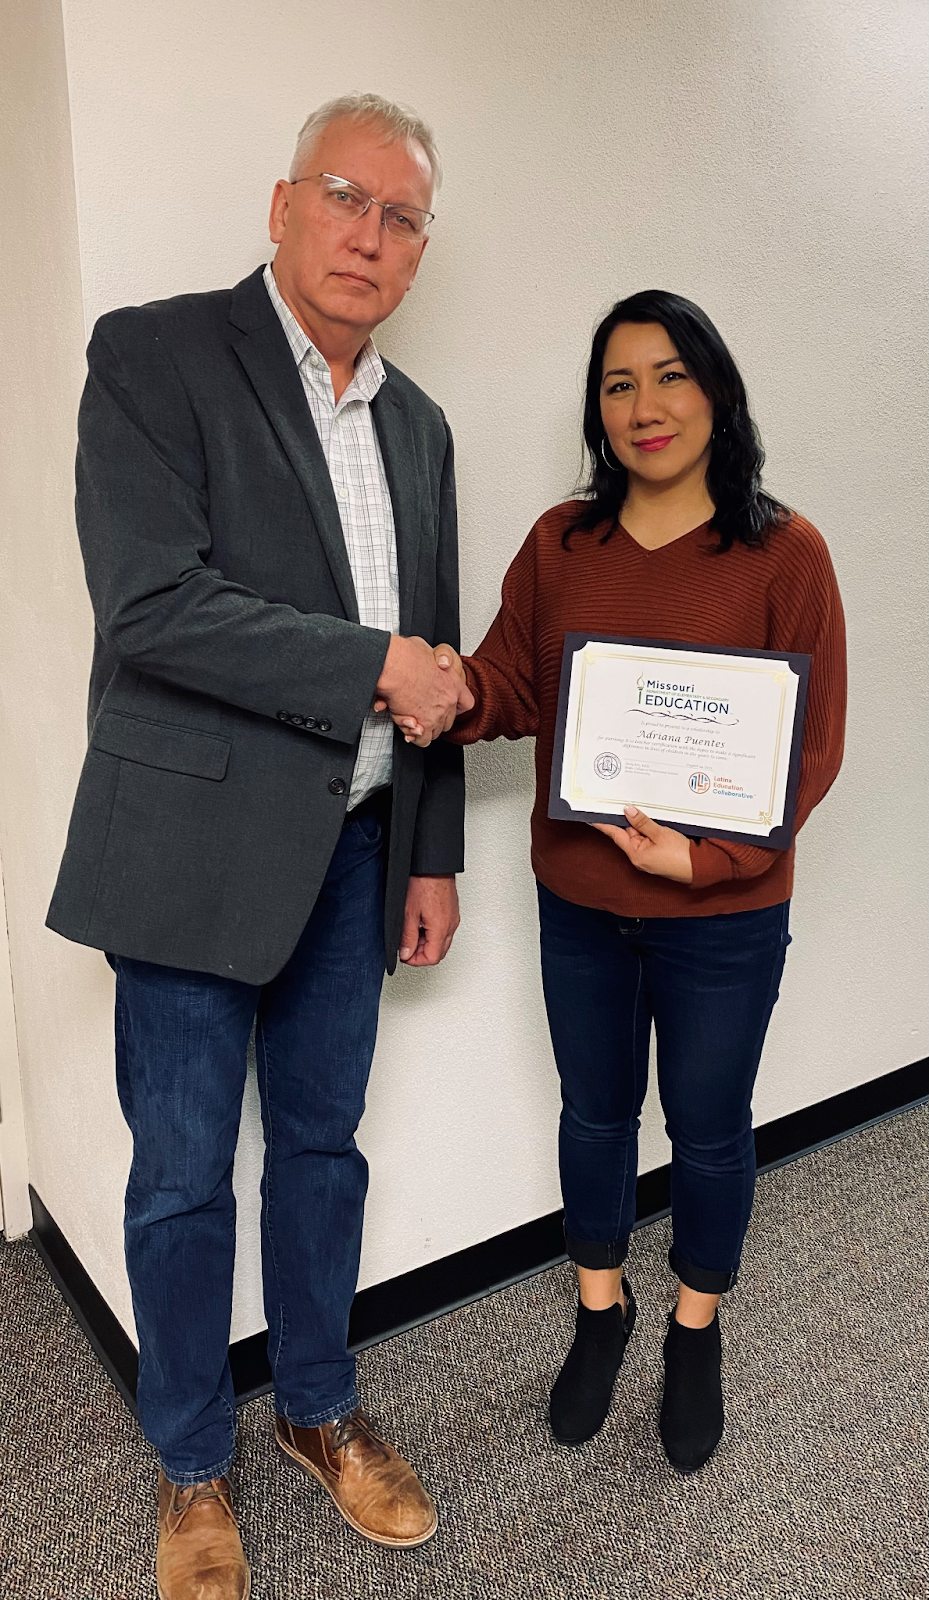 Andy Jett and Adriana Puentes holding a certificate and shaking hands